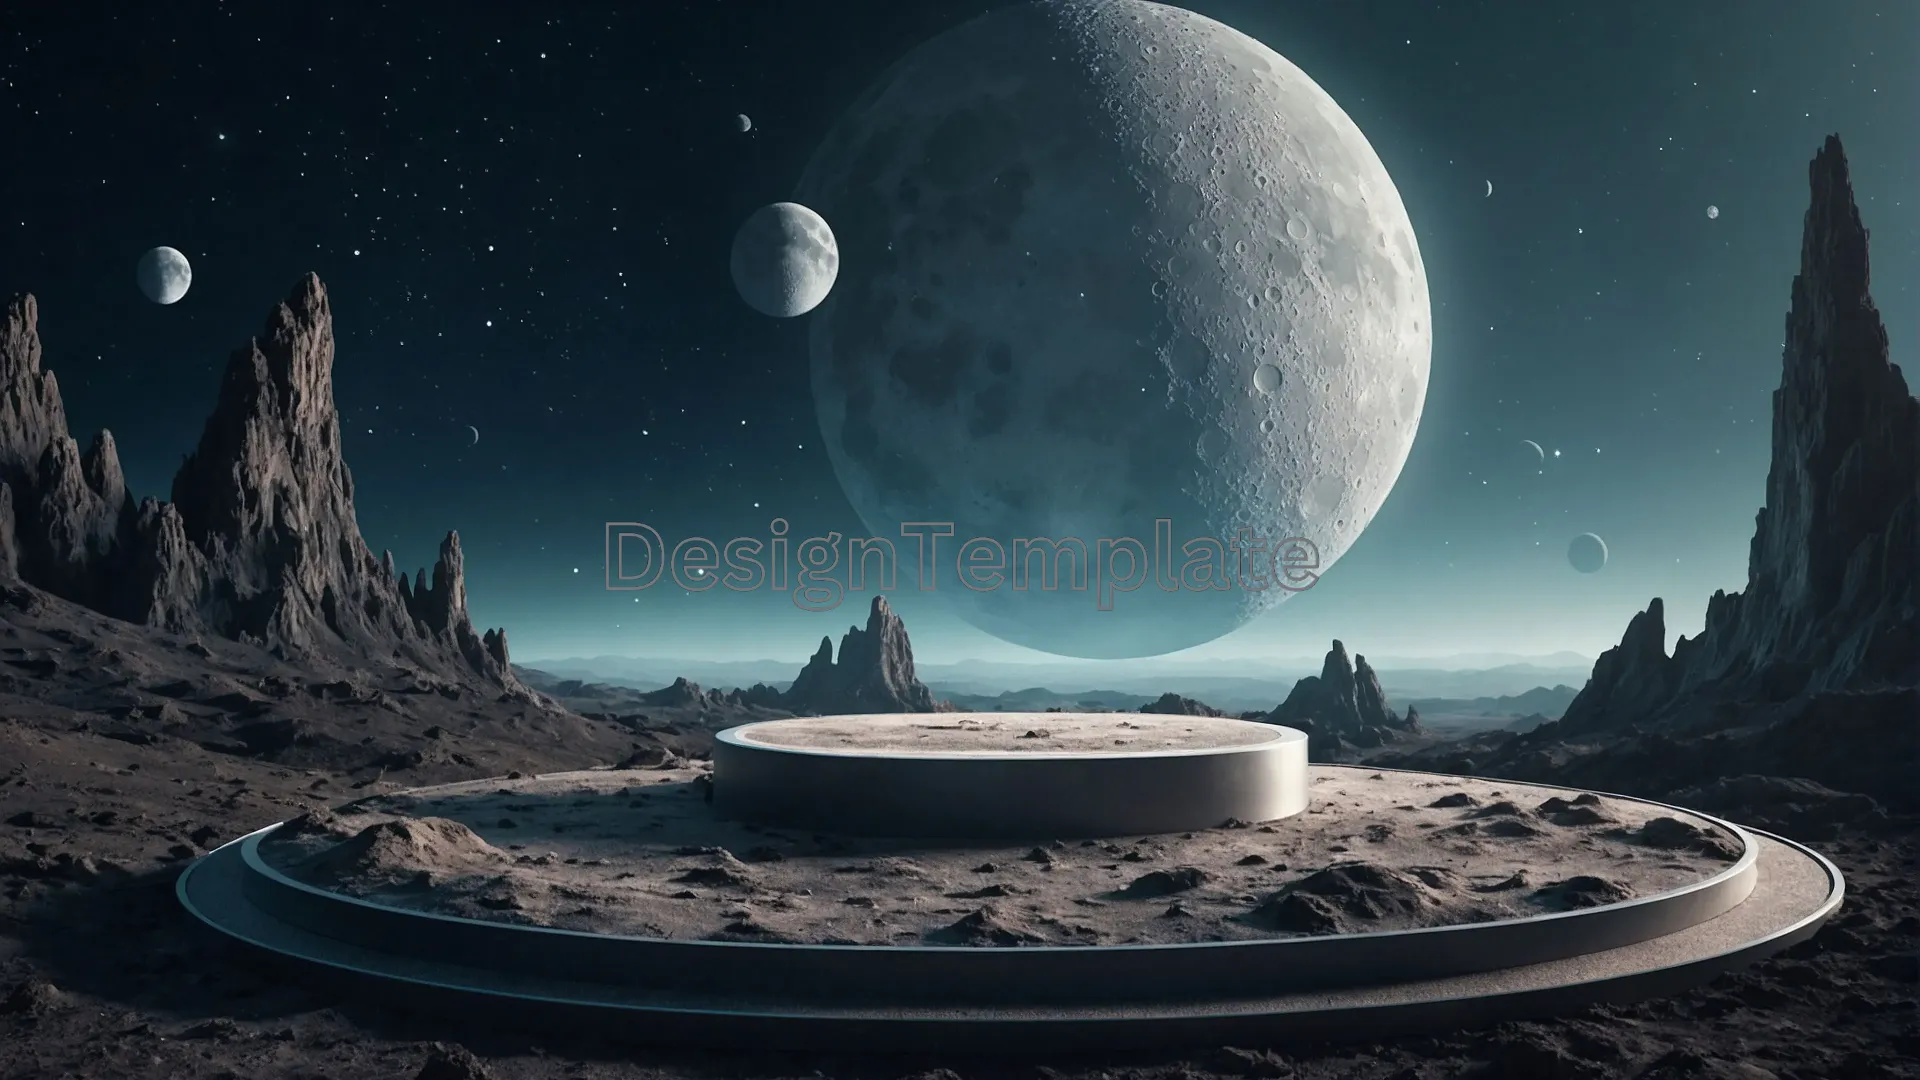 Moon Rising Over Otherworldly Terrain Background Image